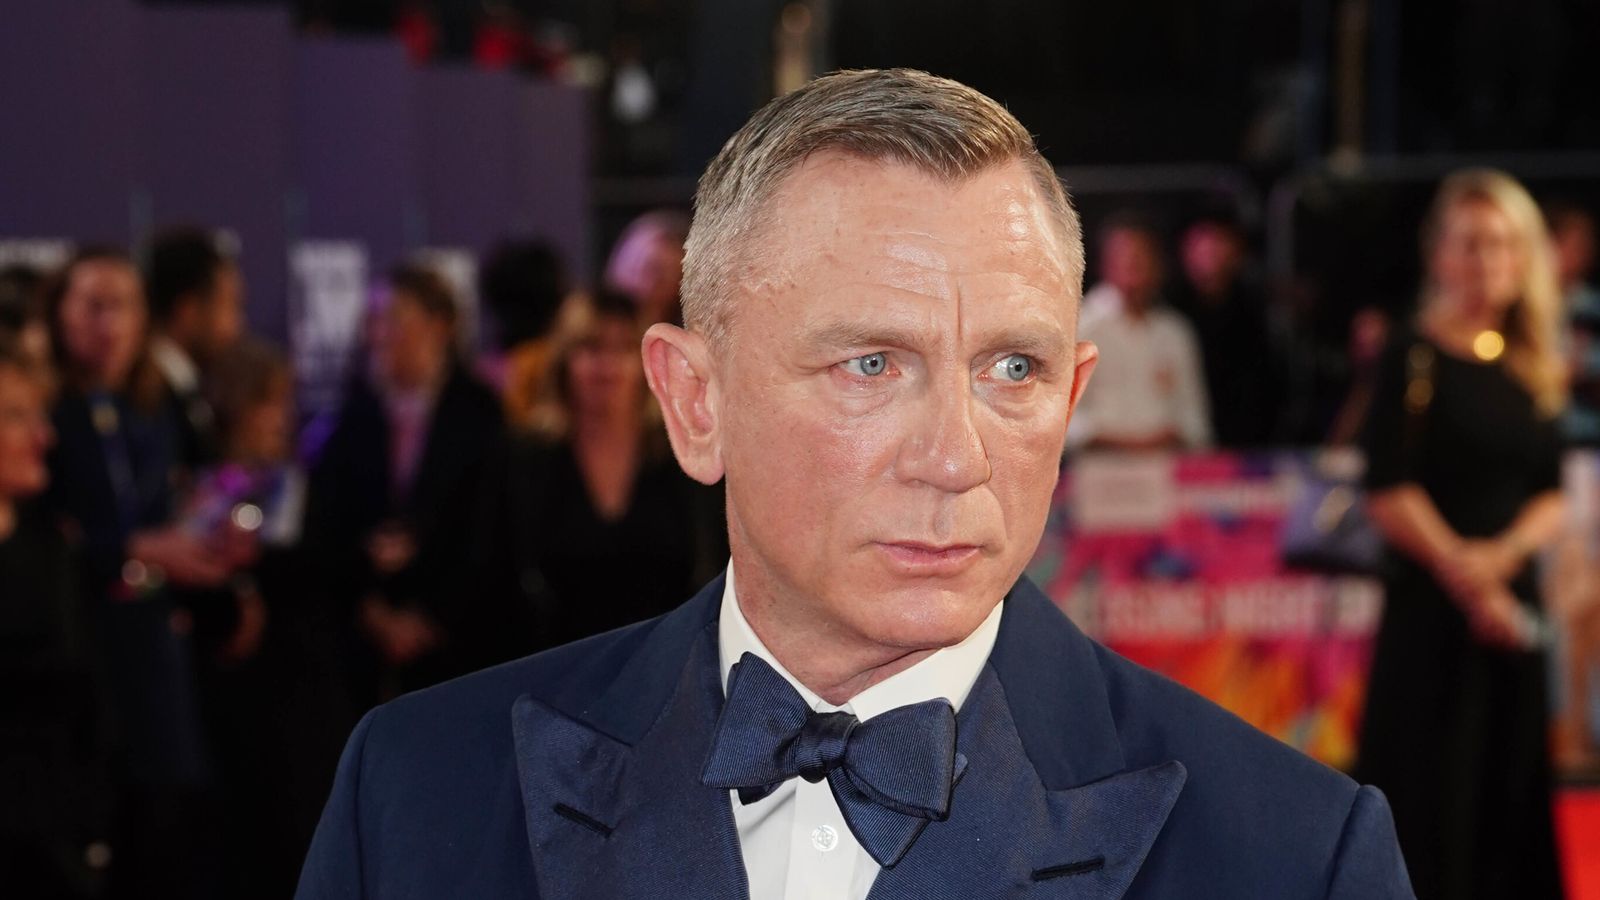 Daniel Craig tells of filming new Knives Out movie in Greece during lockdown at London Film Festival